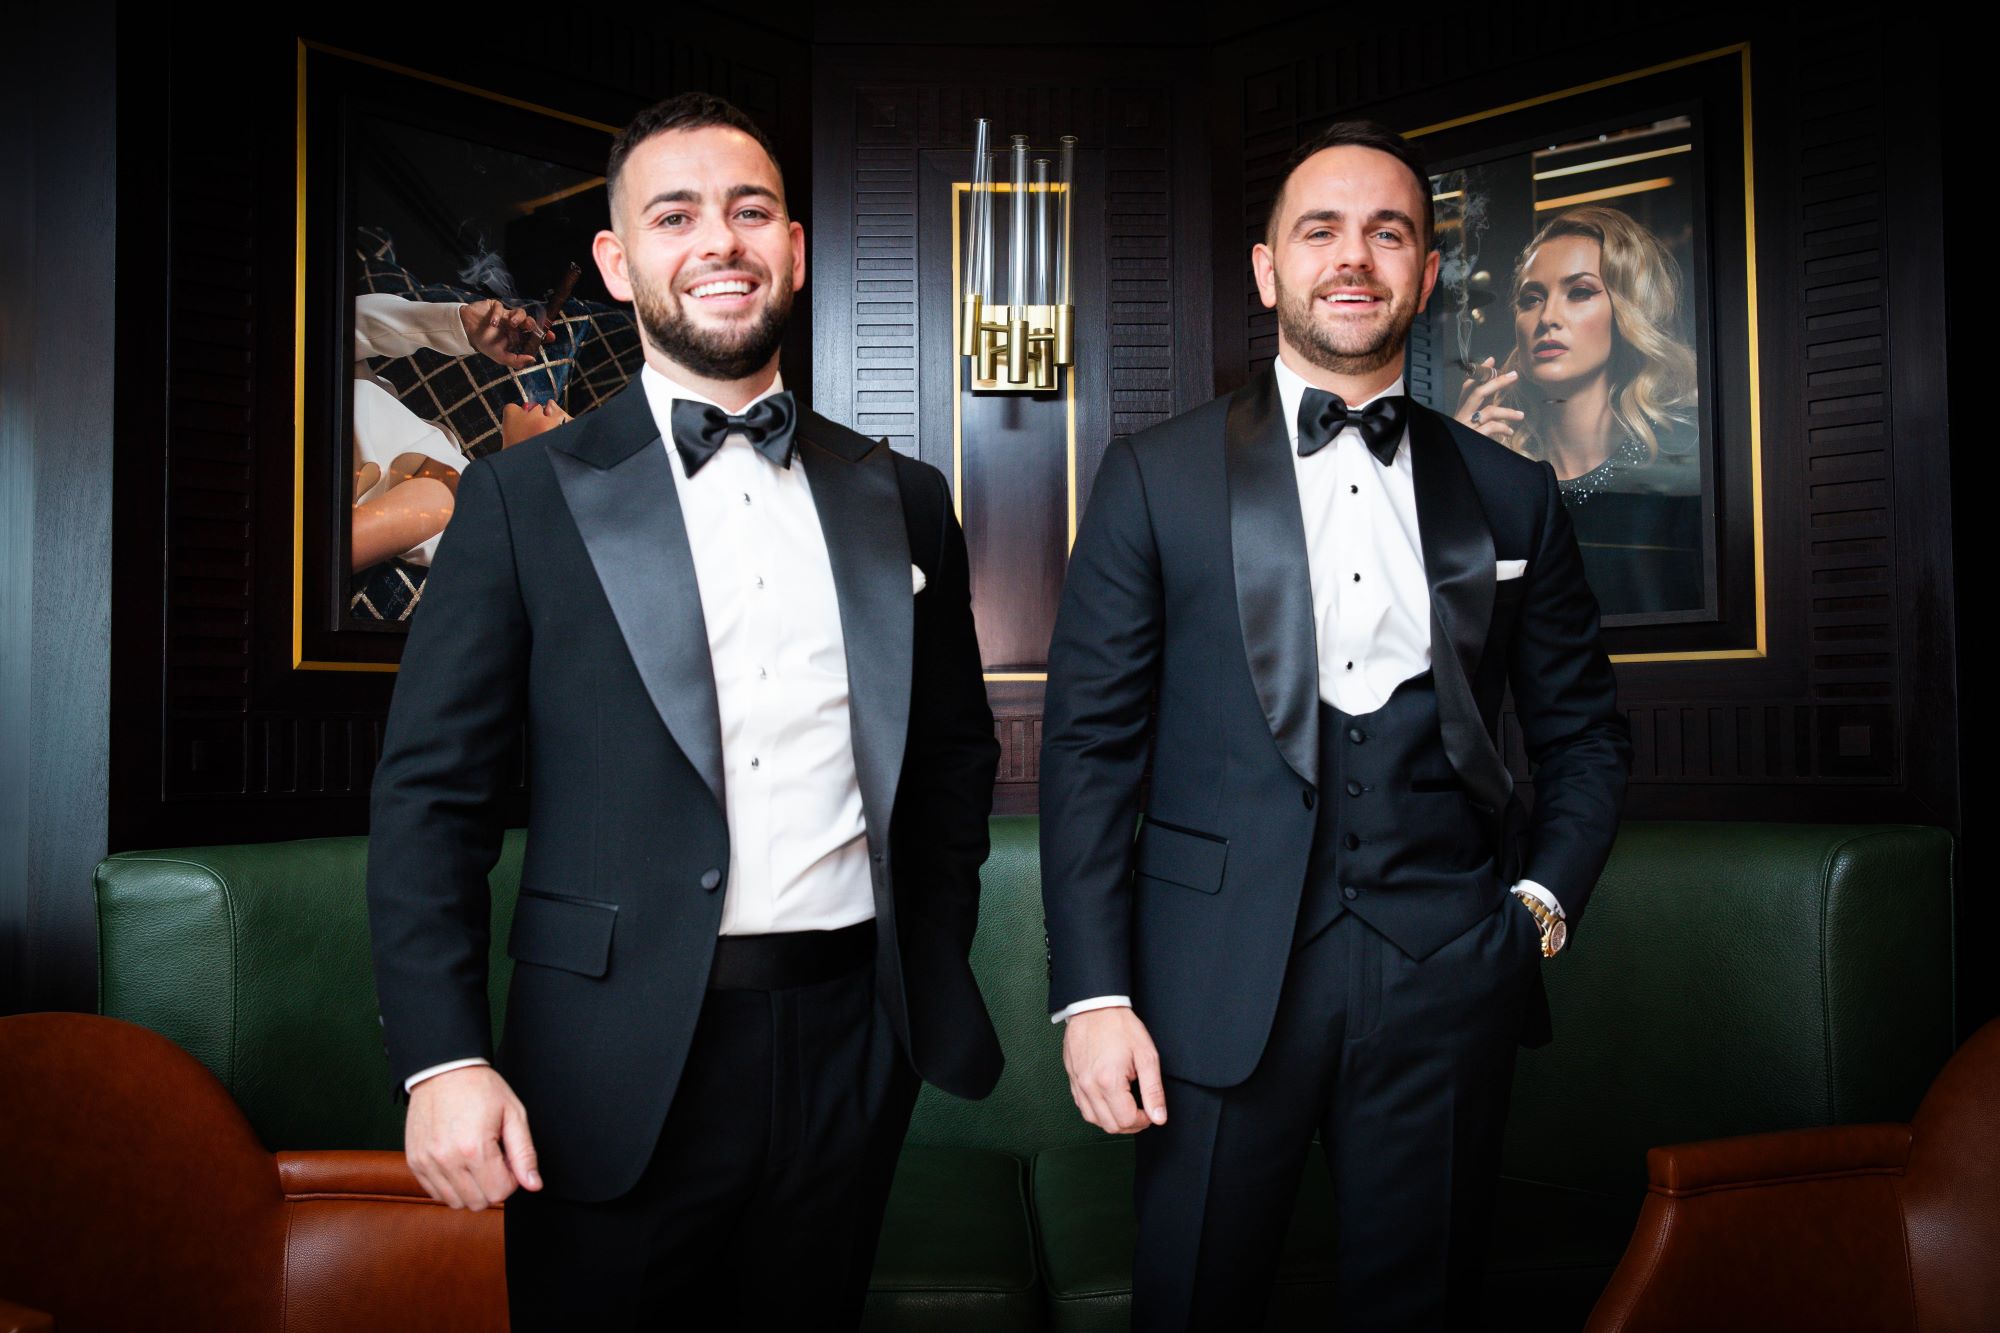 Ryan Smith and Calvin Smith stand side by side in tuxedos. Image supplied with release by Suited and Booted.